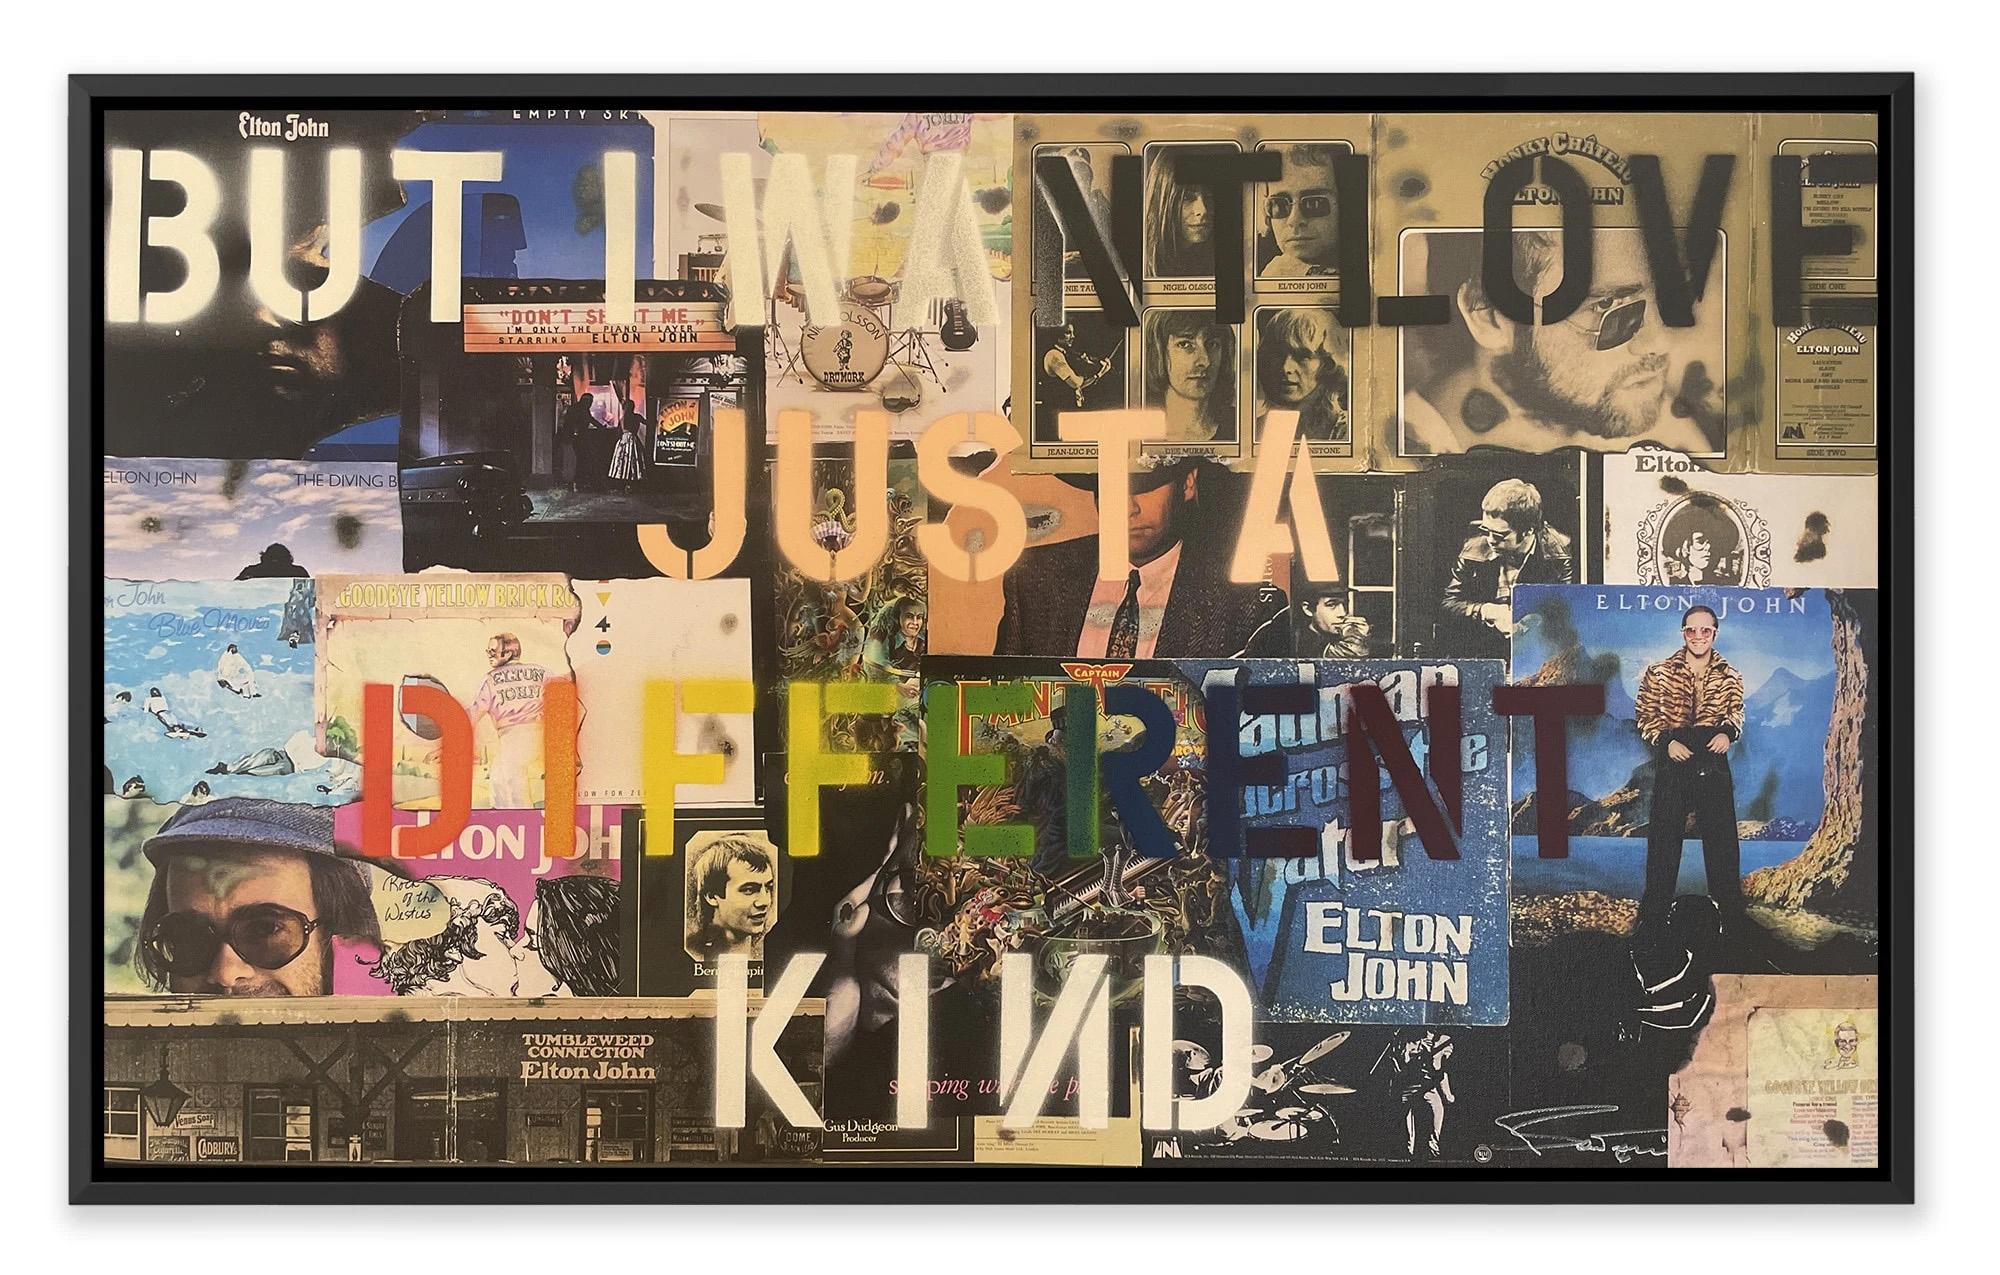 MEDIUM: Hand-embellished monotype on canvas
IMAGE SIZE: 25" x 41.5"
SKU: BT0016

Bernie Taupin's views art as a visual extension of his song lyrics. Inspired by The Bitch is Back,” released in 1974.